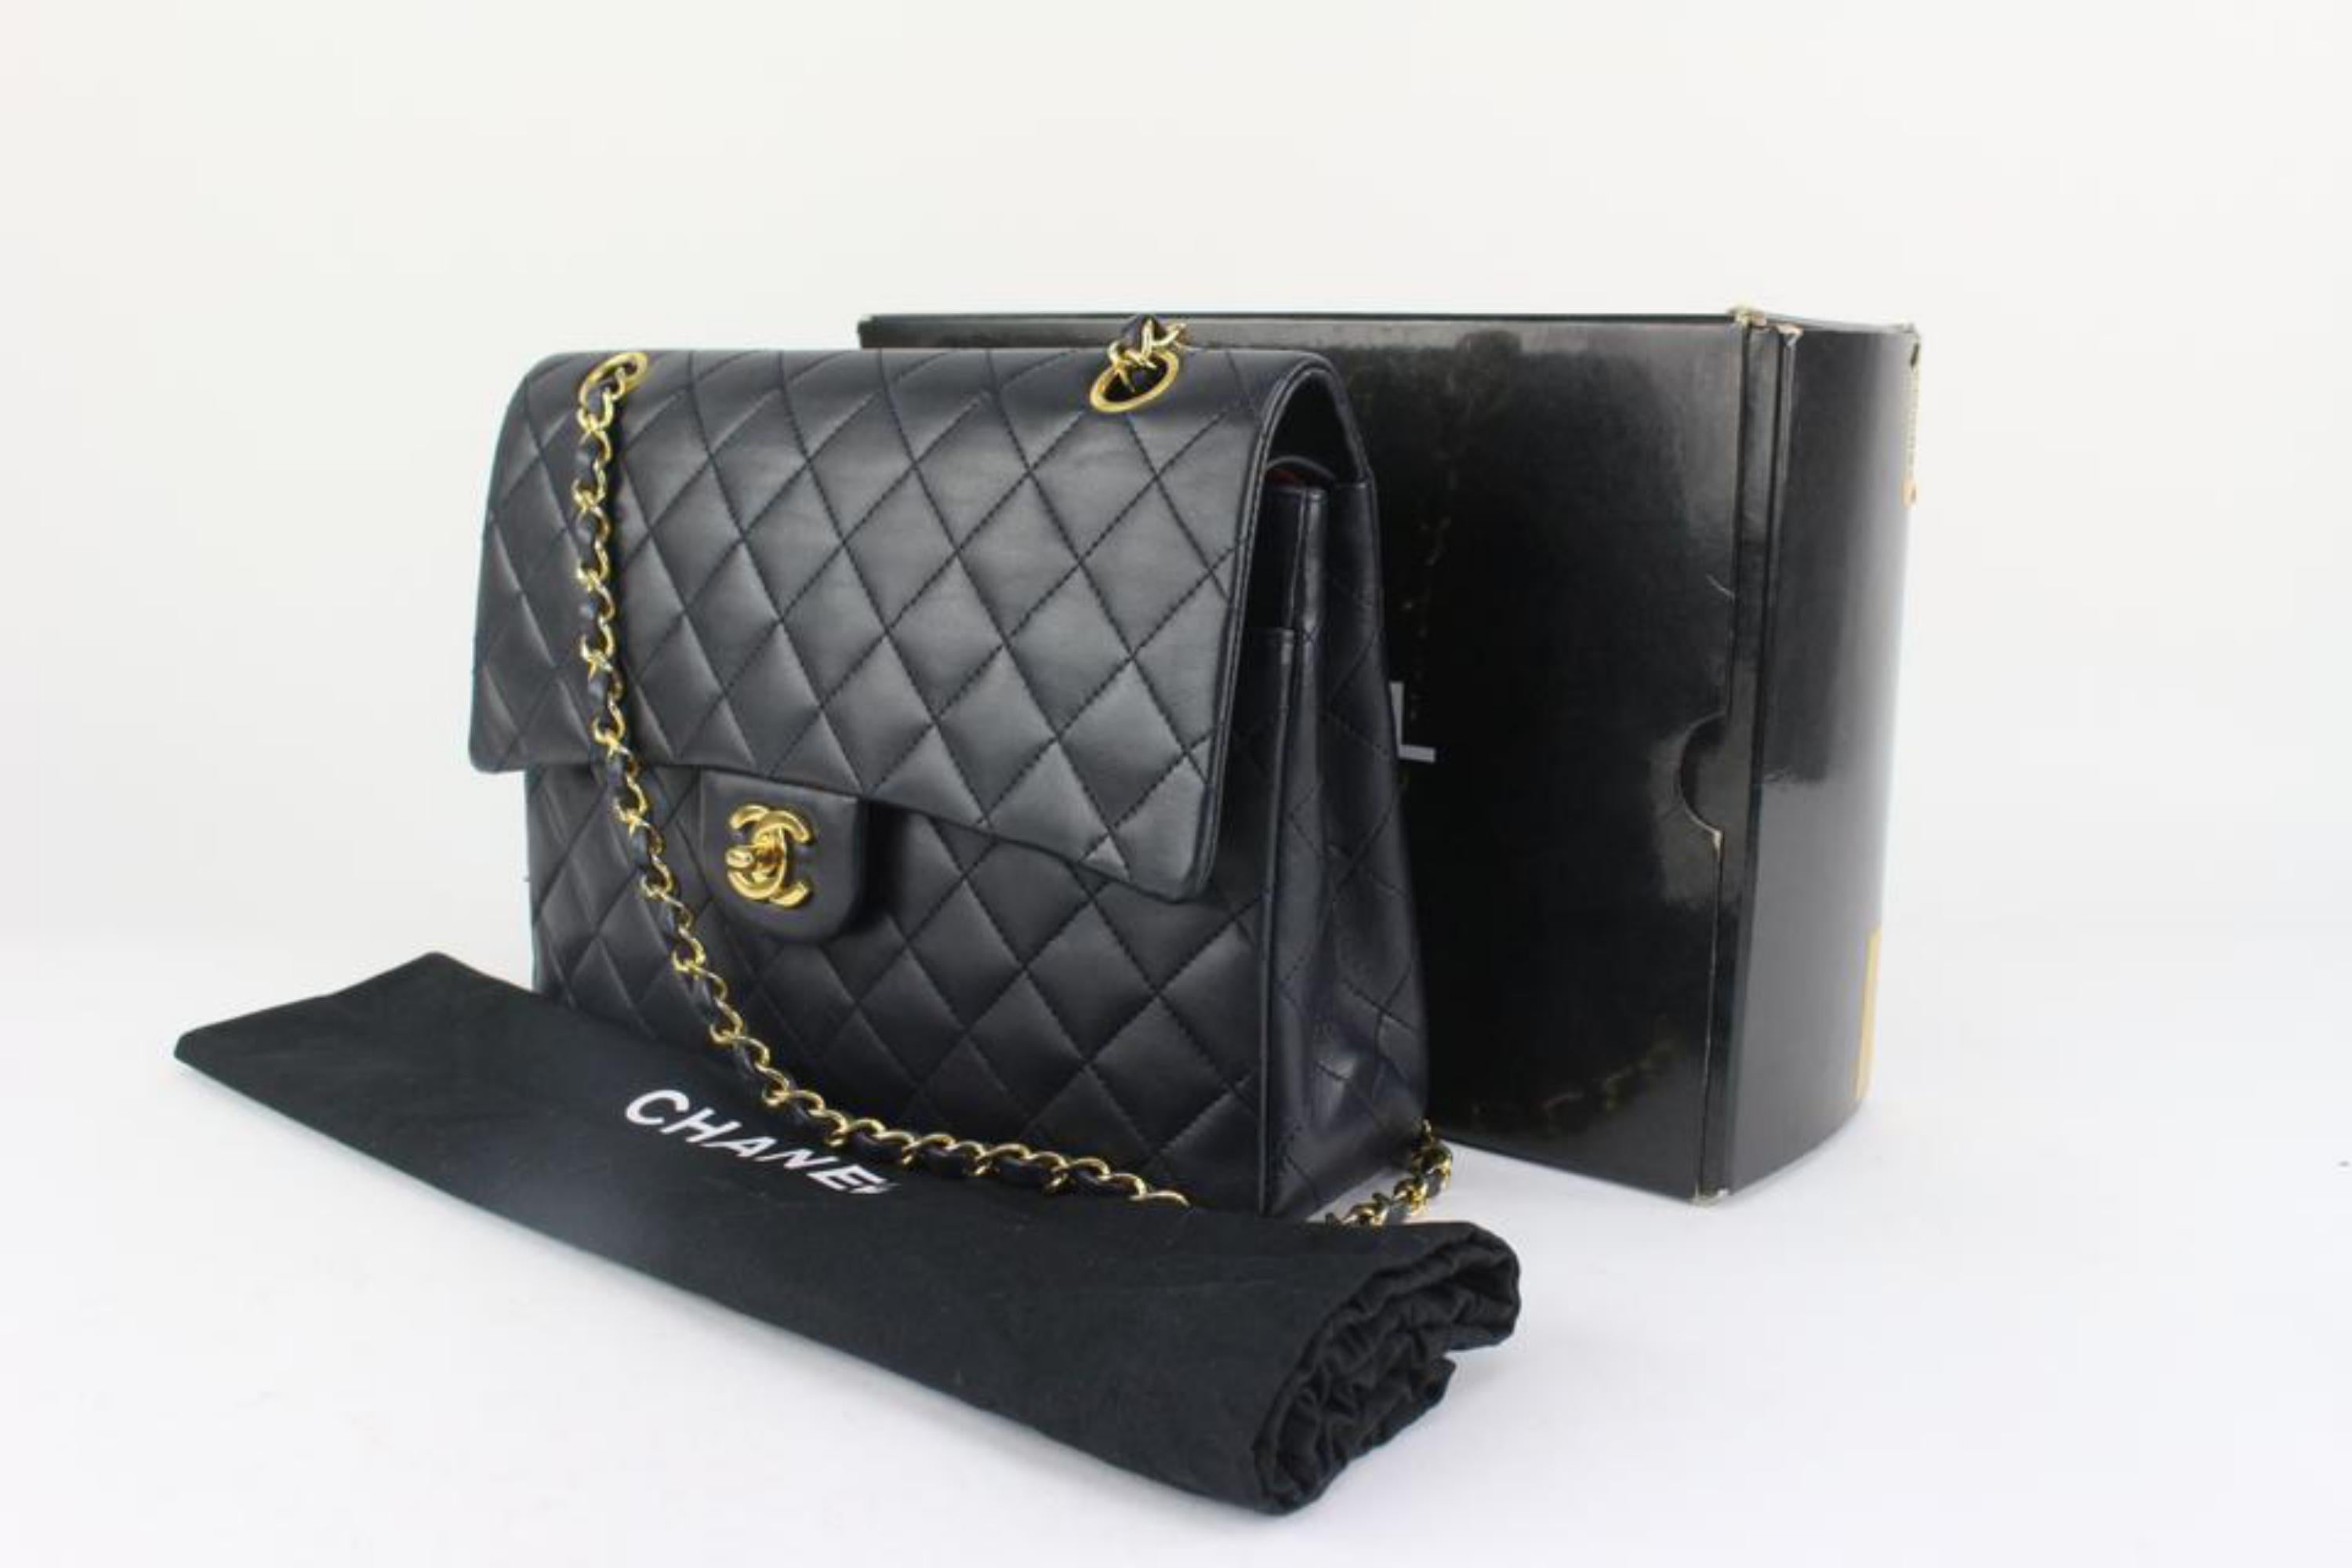 Chanel Navy Quilted Lambskin GHW Square Half Flap Medium Classic Bag 1116c39
Date Code/Serial Number: 1188099
Made In: France
Measurements: Length:  10